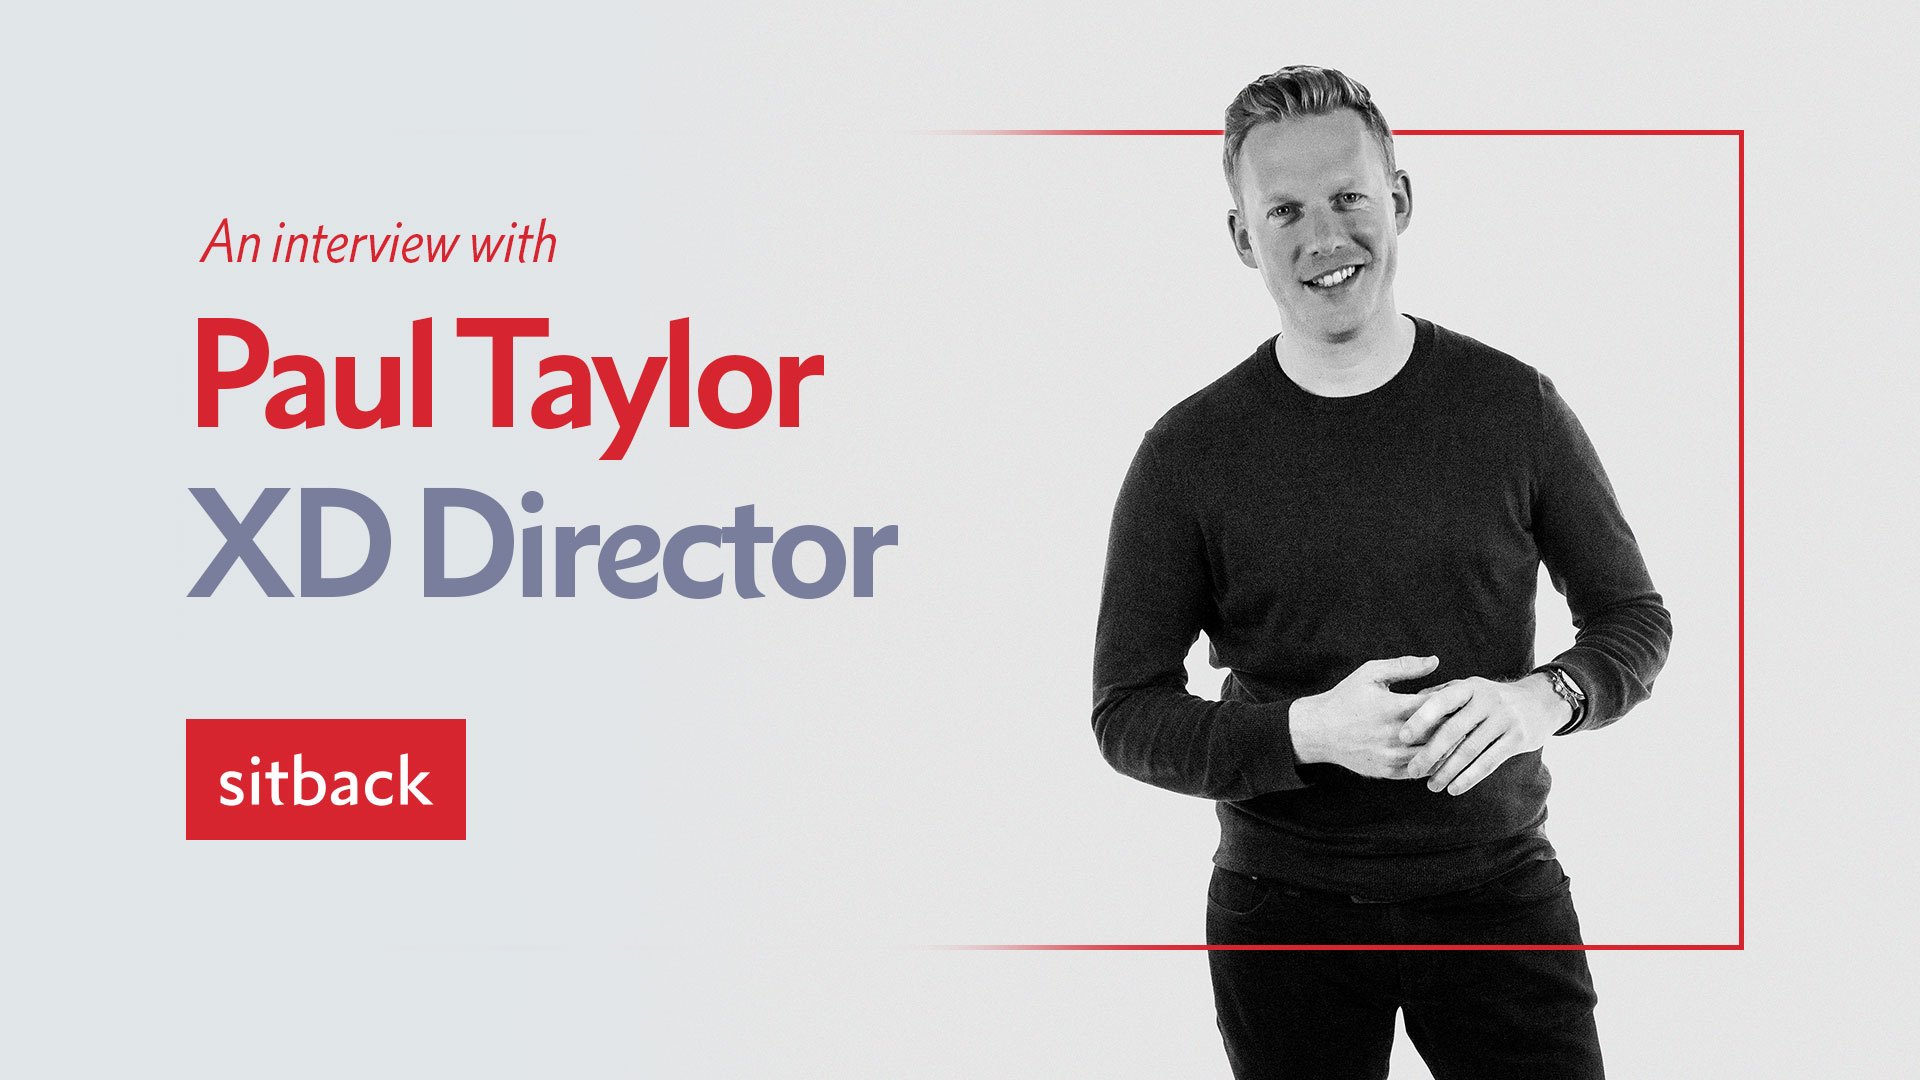 Introducing Paul Taylor - An Interview with Sitback's new XD Director